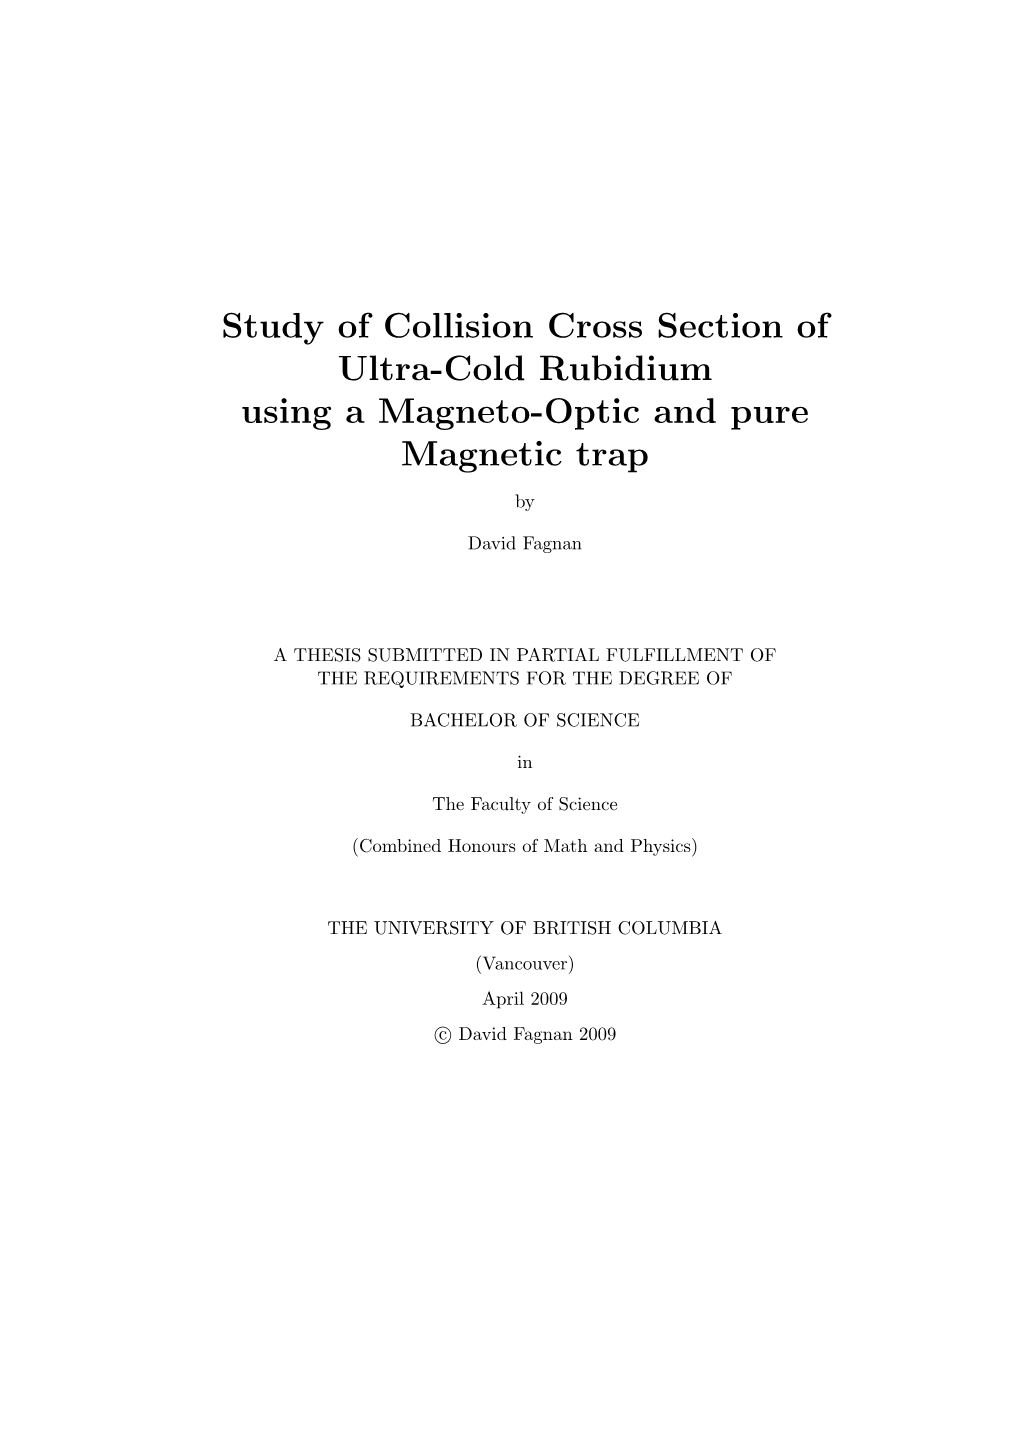 Study of Collision Cross Section of Ultra-Cold Rubidium Using a Magneto-Optic and Pure Magnetic Trap